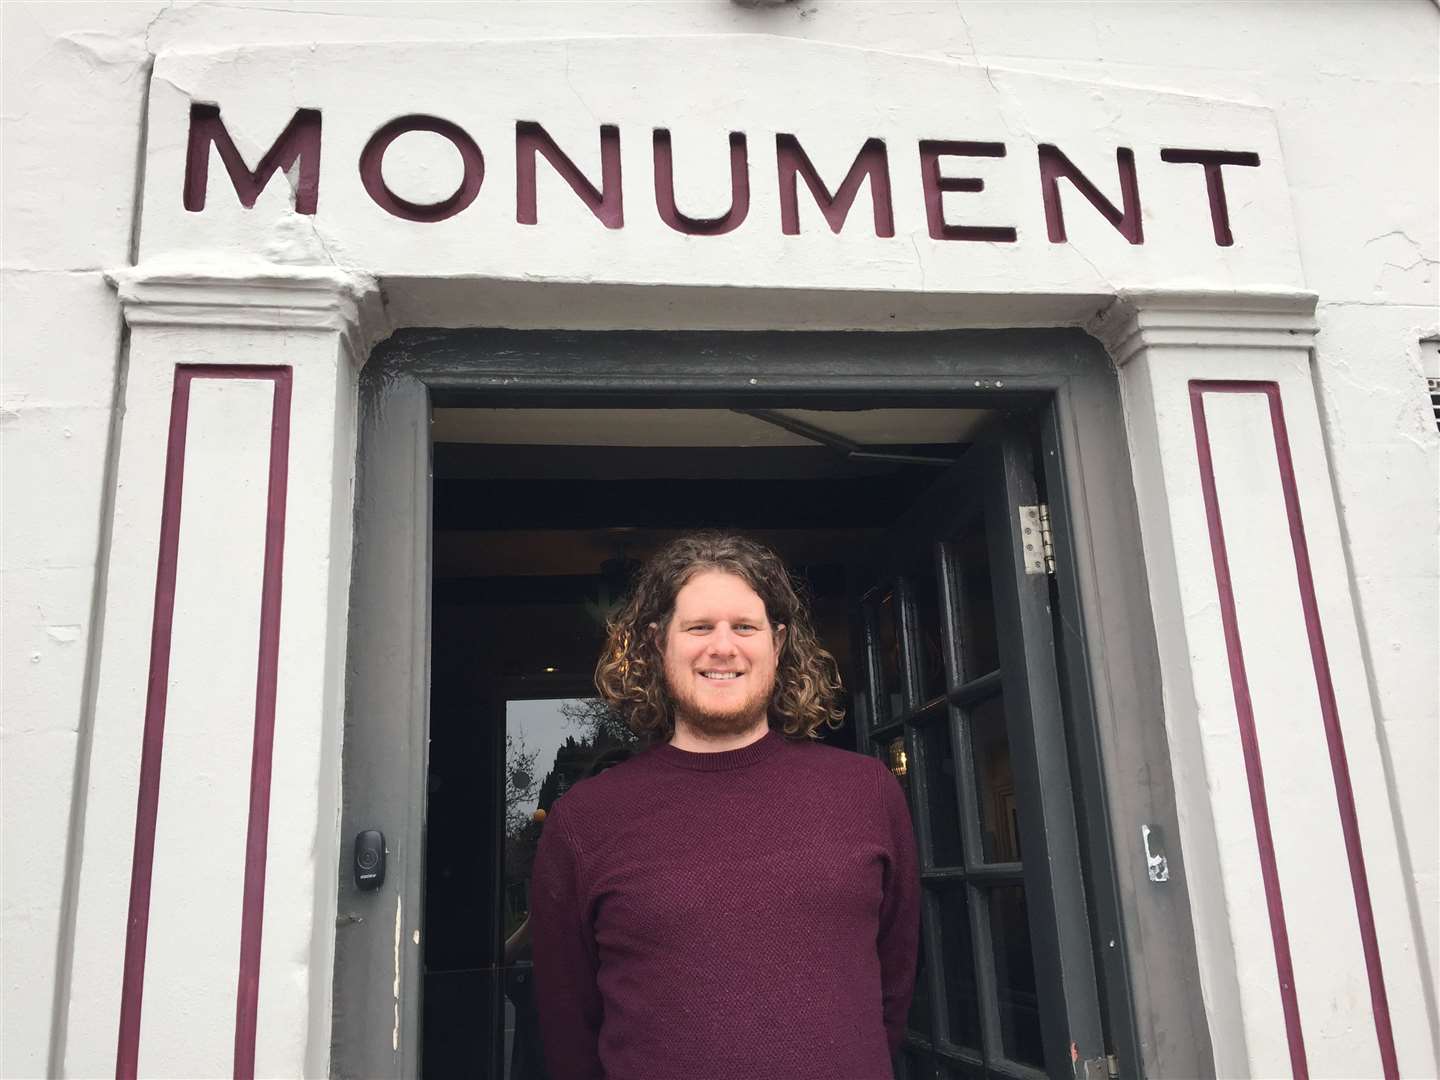 Sam Holden is looking forward to reopening The Monument